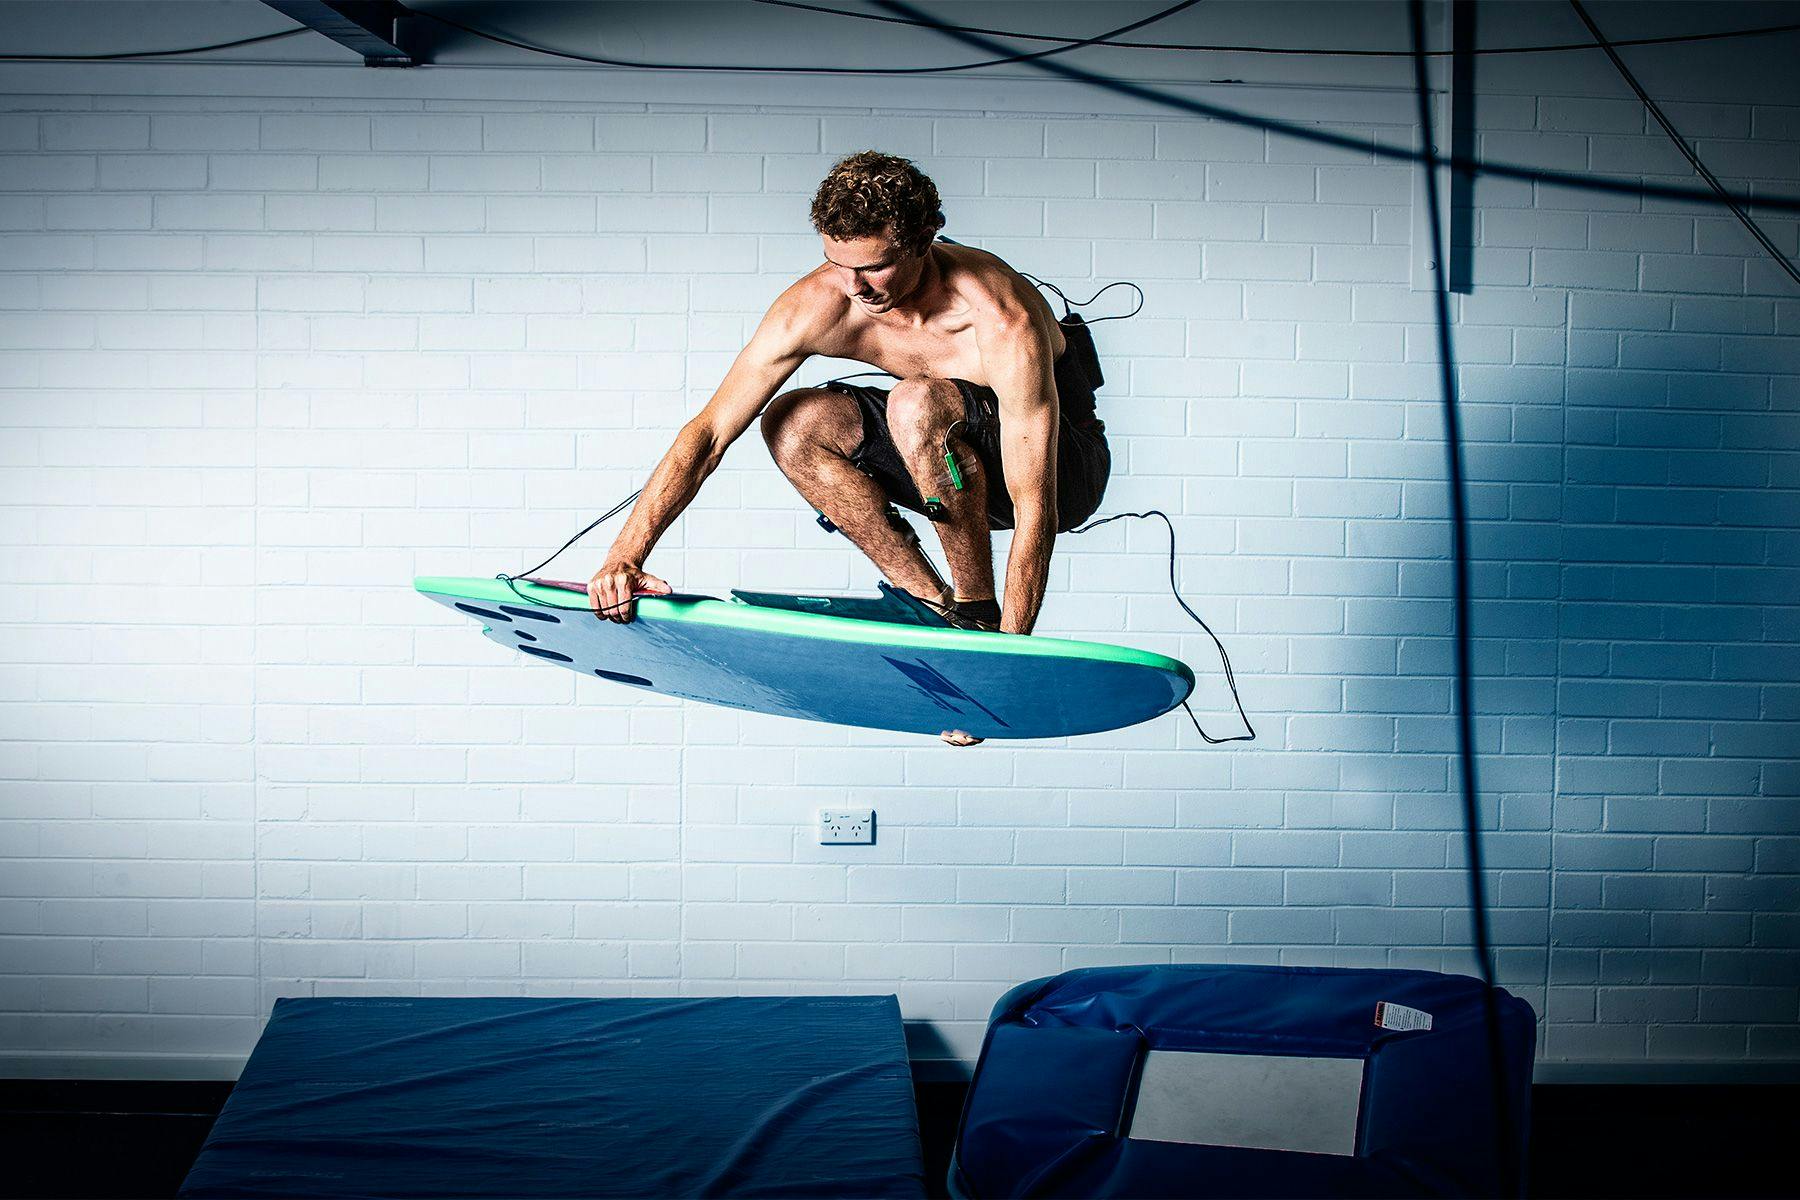 surfer taking part in a scientific study about landing aerial manoeuvres, using a trampoline in a laboratory setting